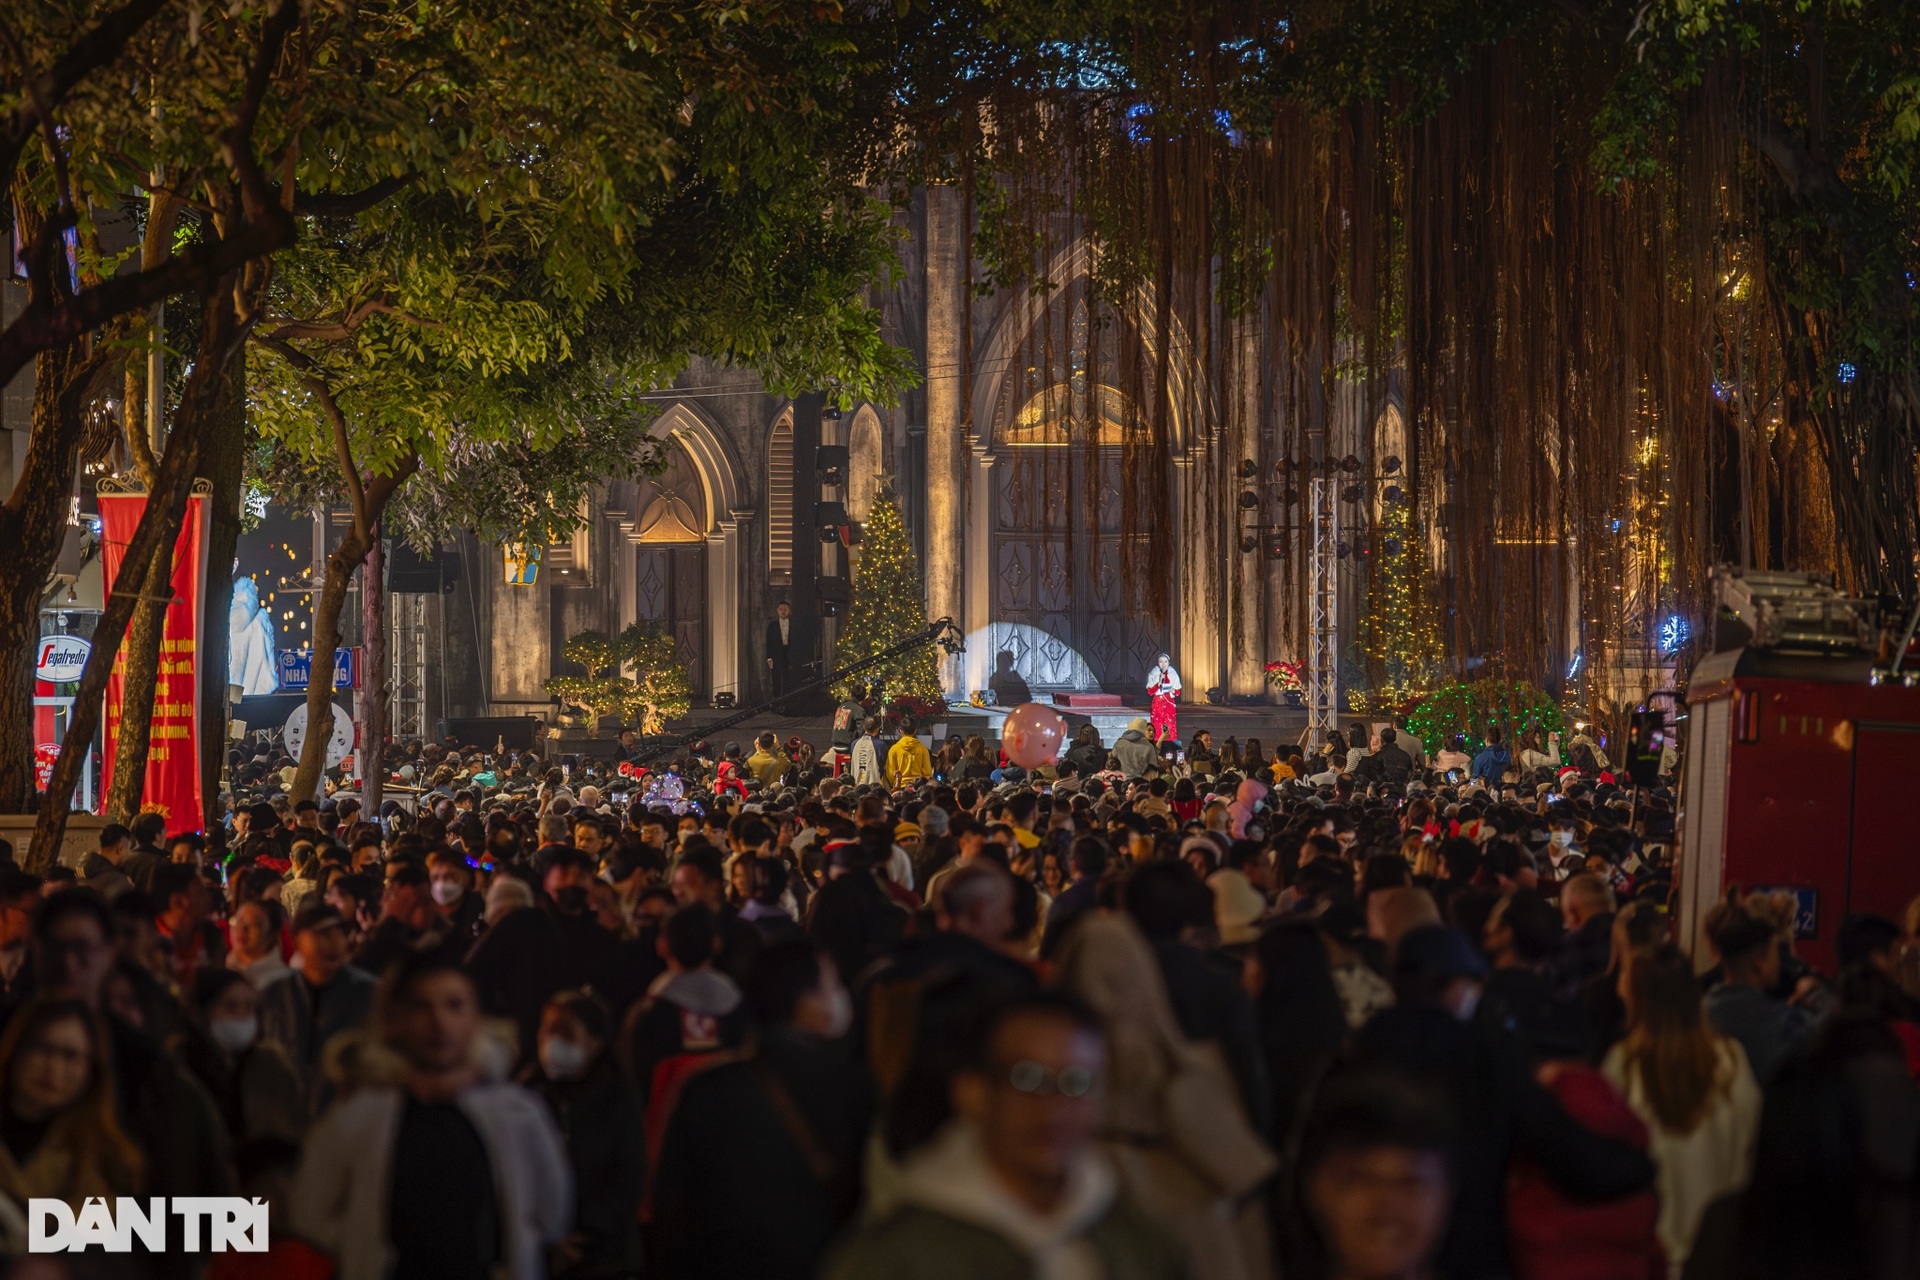 Hanoi is 10 degrees Celsius cold, young people still flock to the Cathedral on Christmas Eve - August